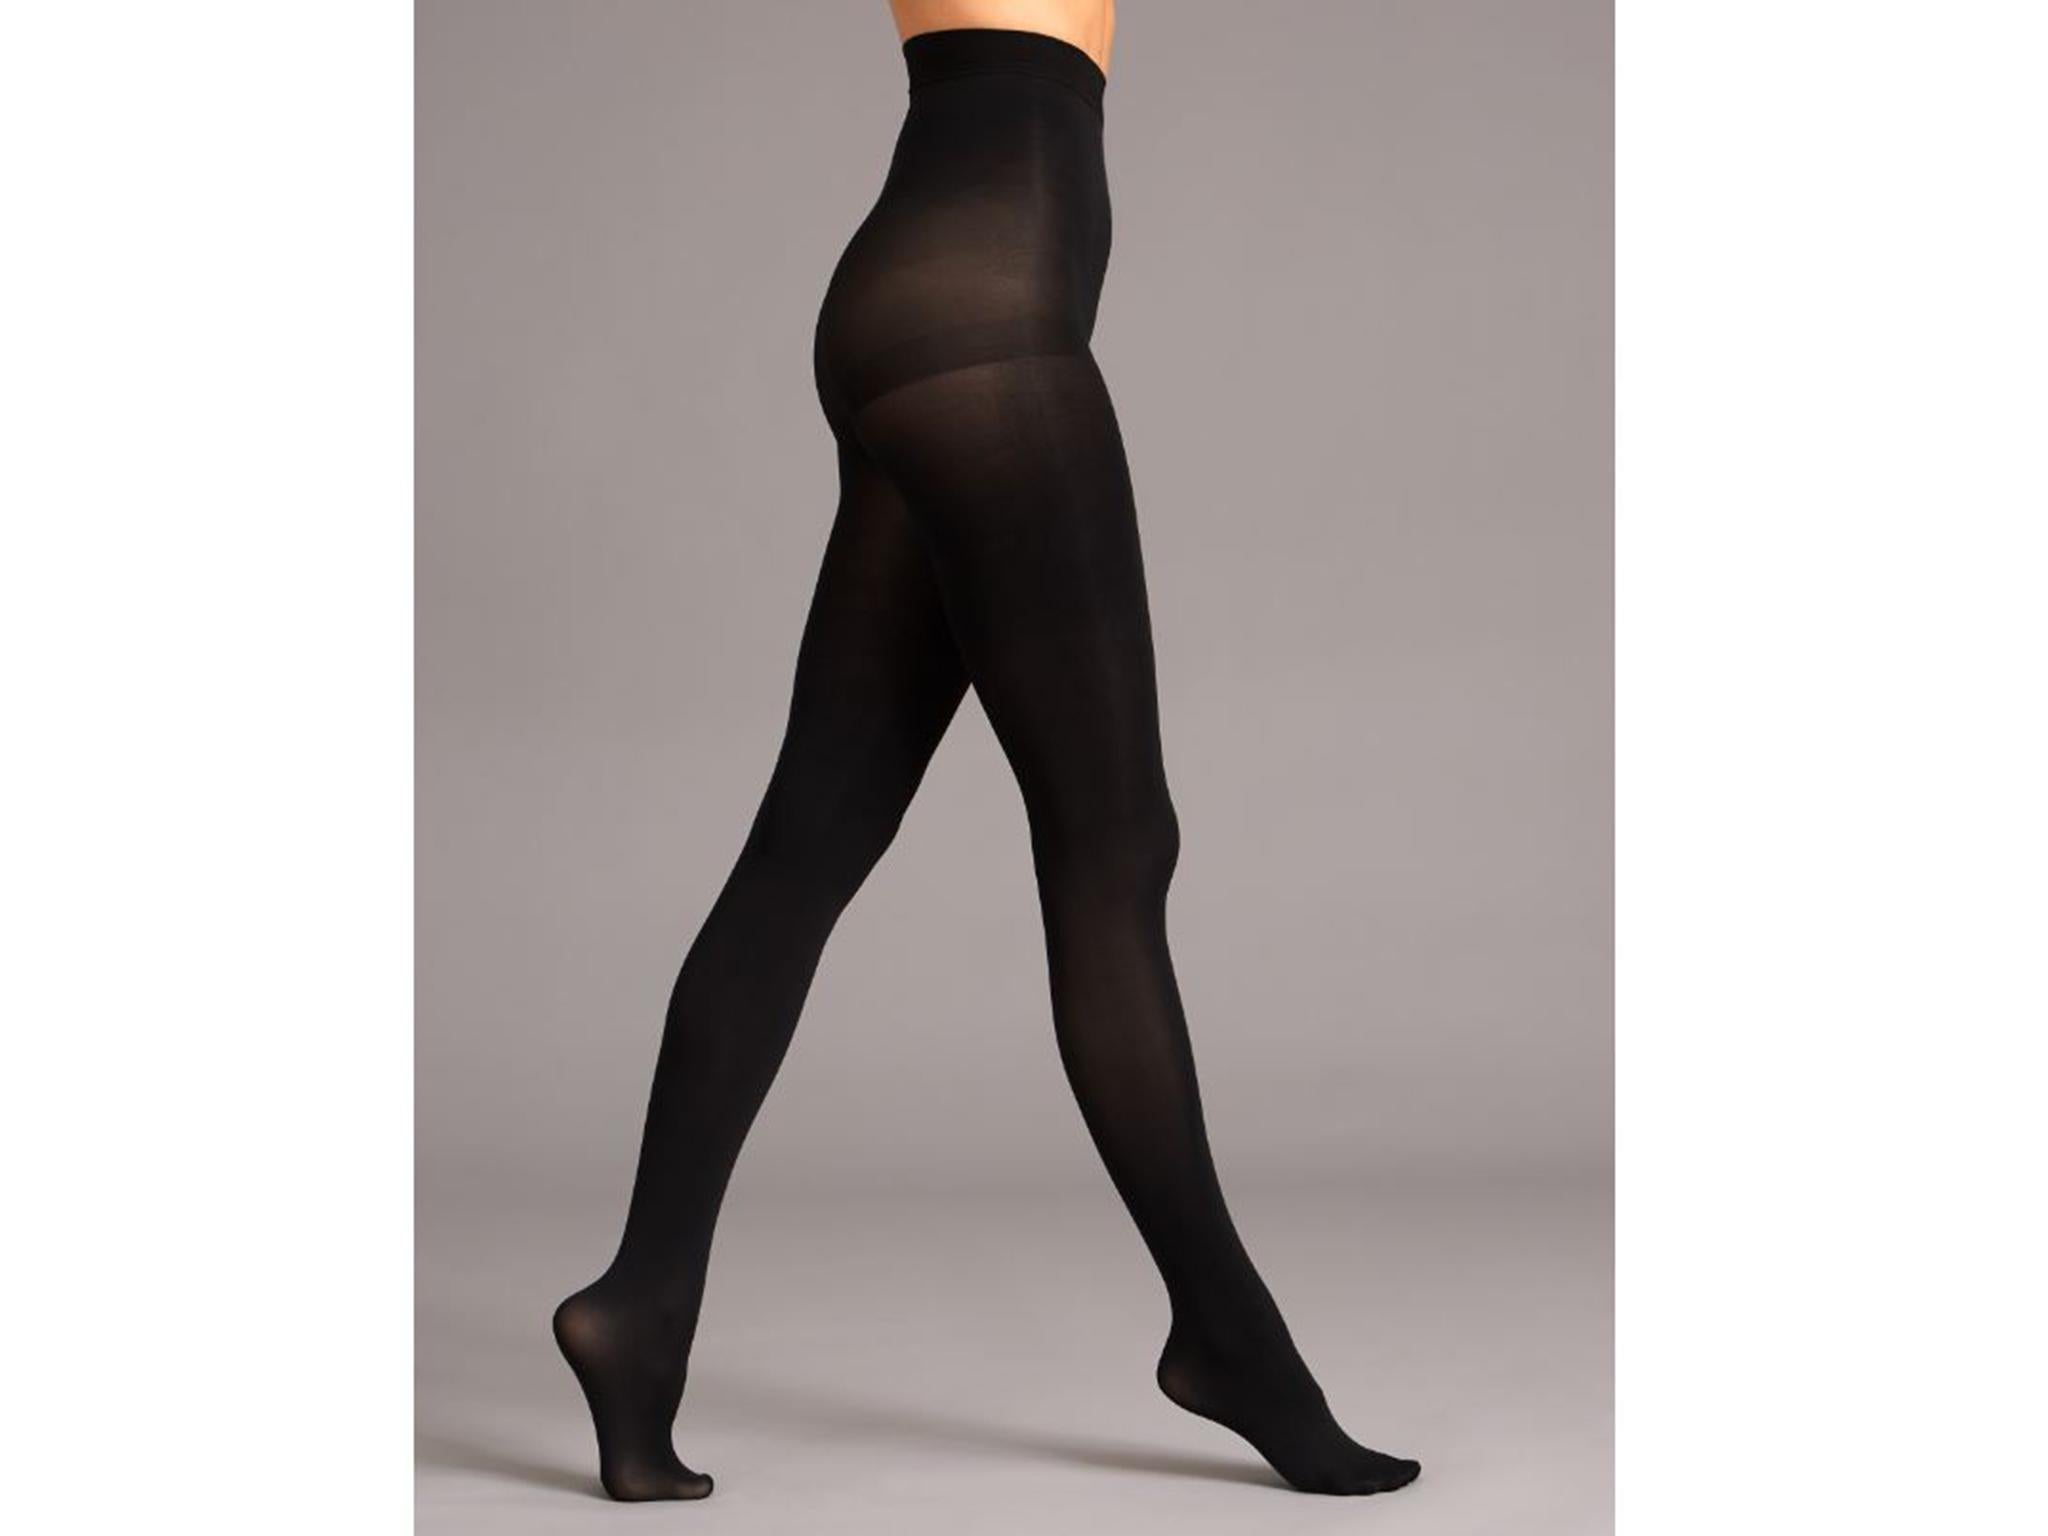 Dancing Girl One Size Argyle Patterned Tights in Mostly Black and Lilac shades